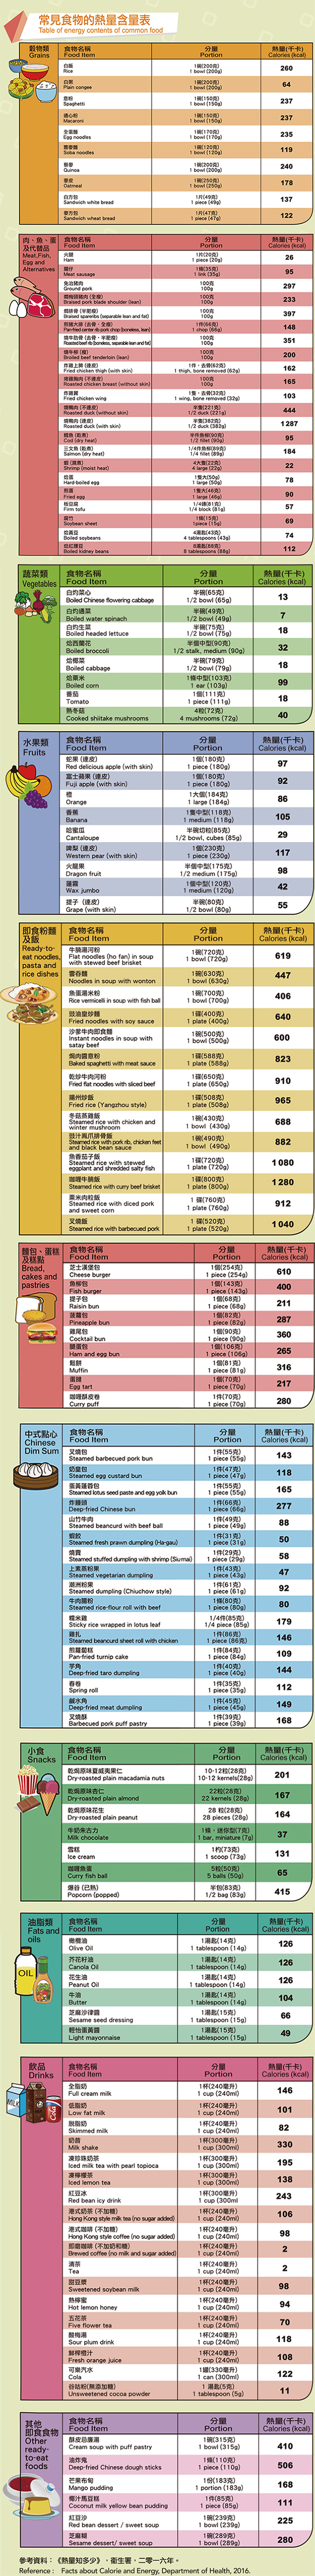 Table of energy contents of common food